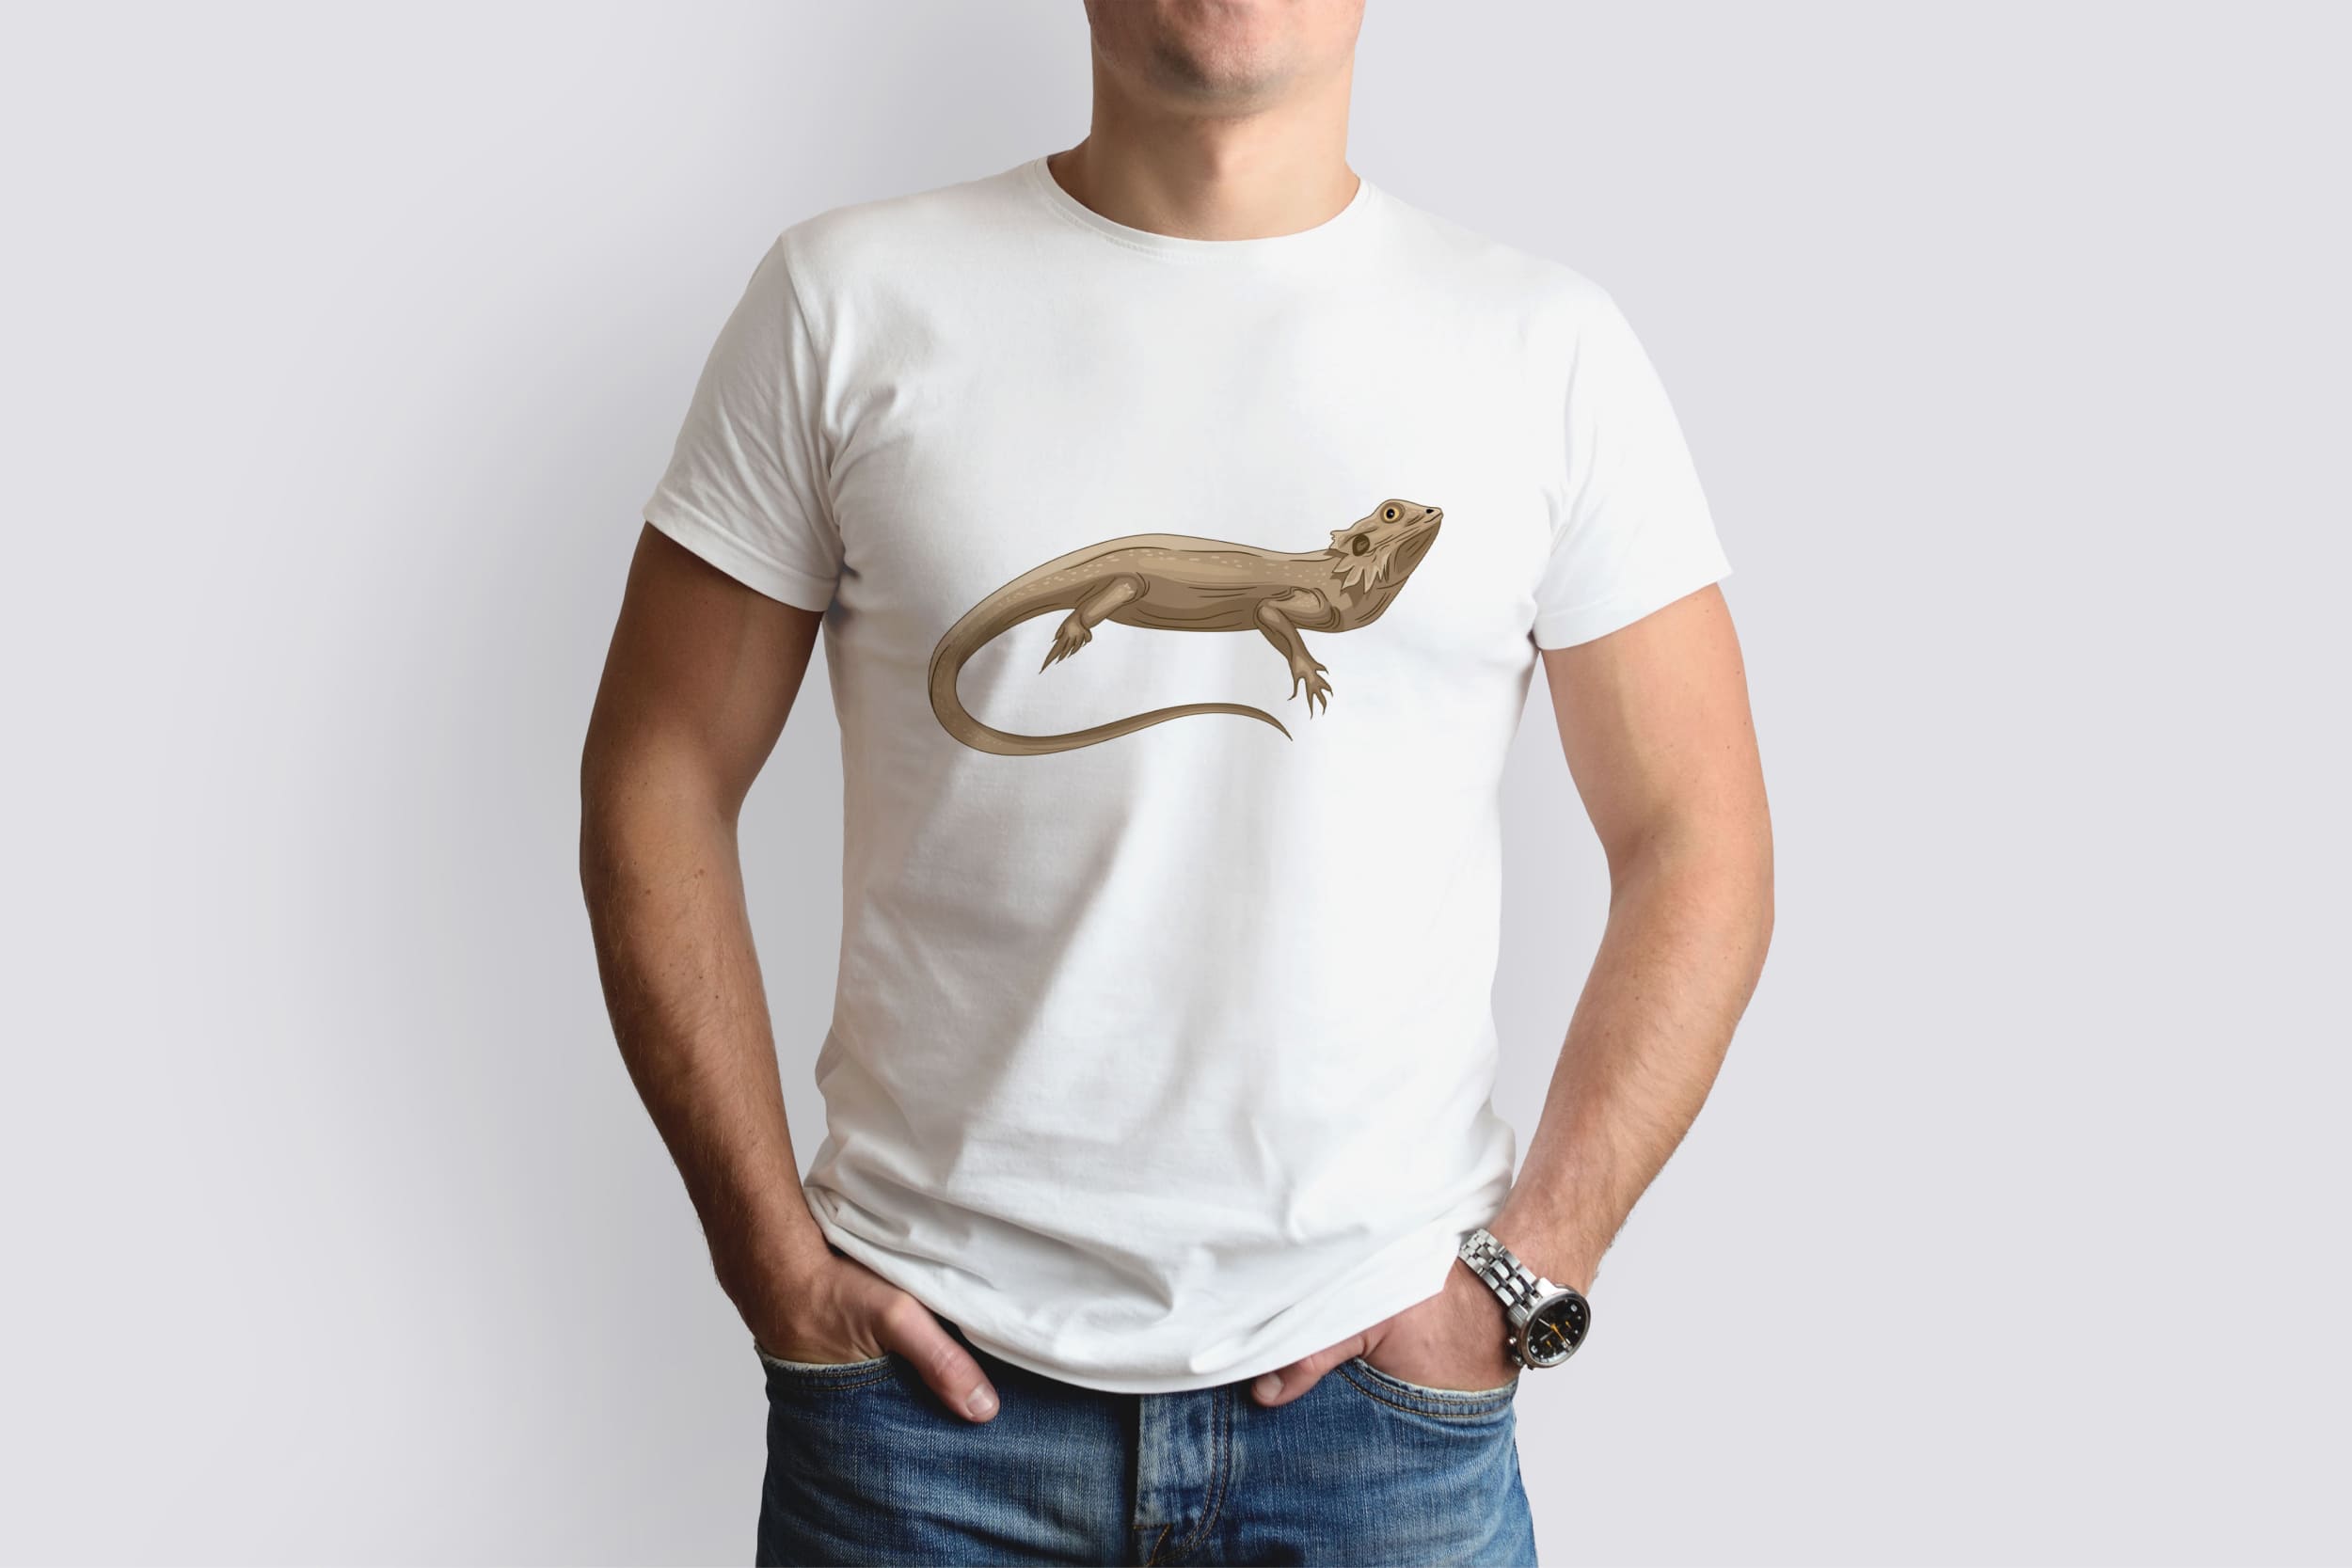 A white t-shirt on a man with an image of a brown bearded dragon, which lies.